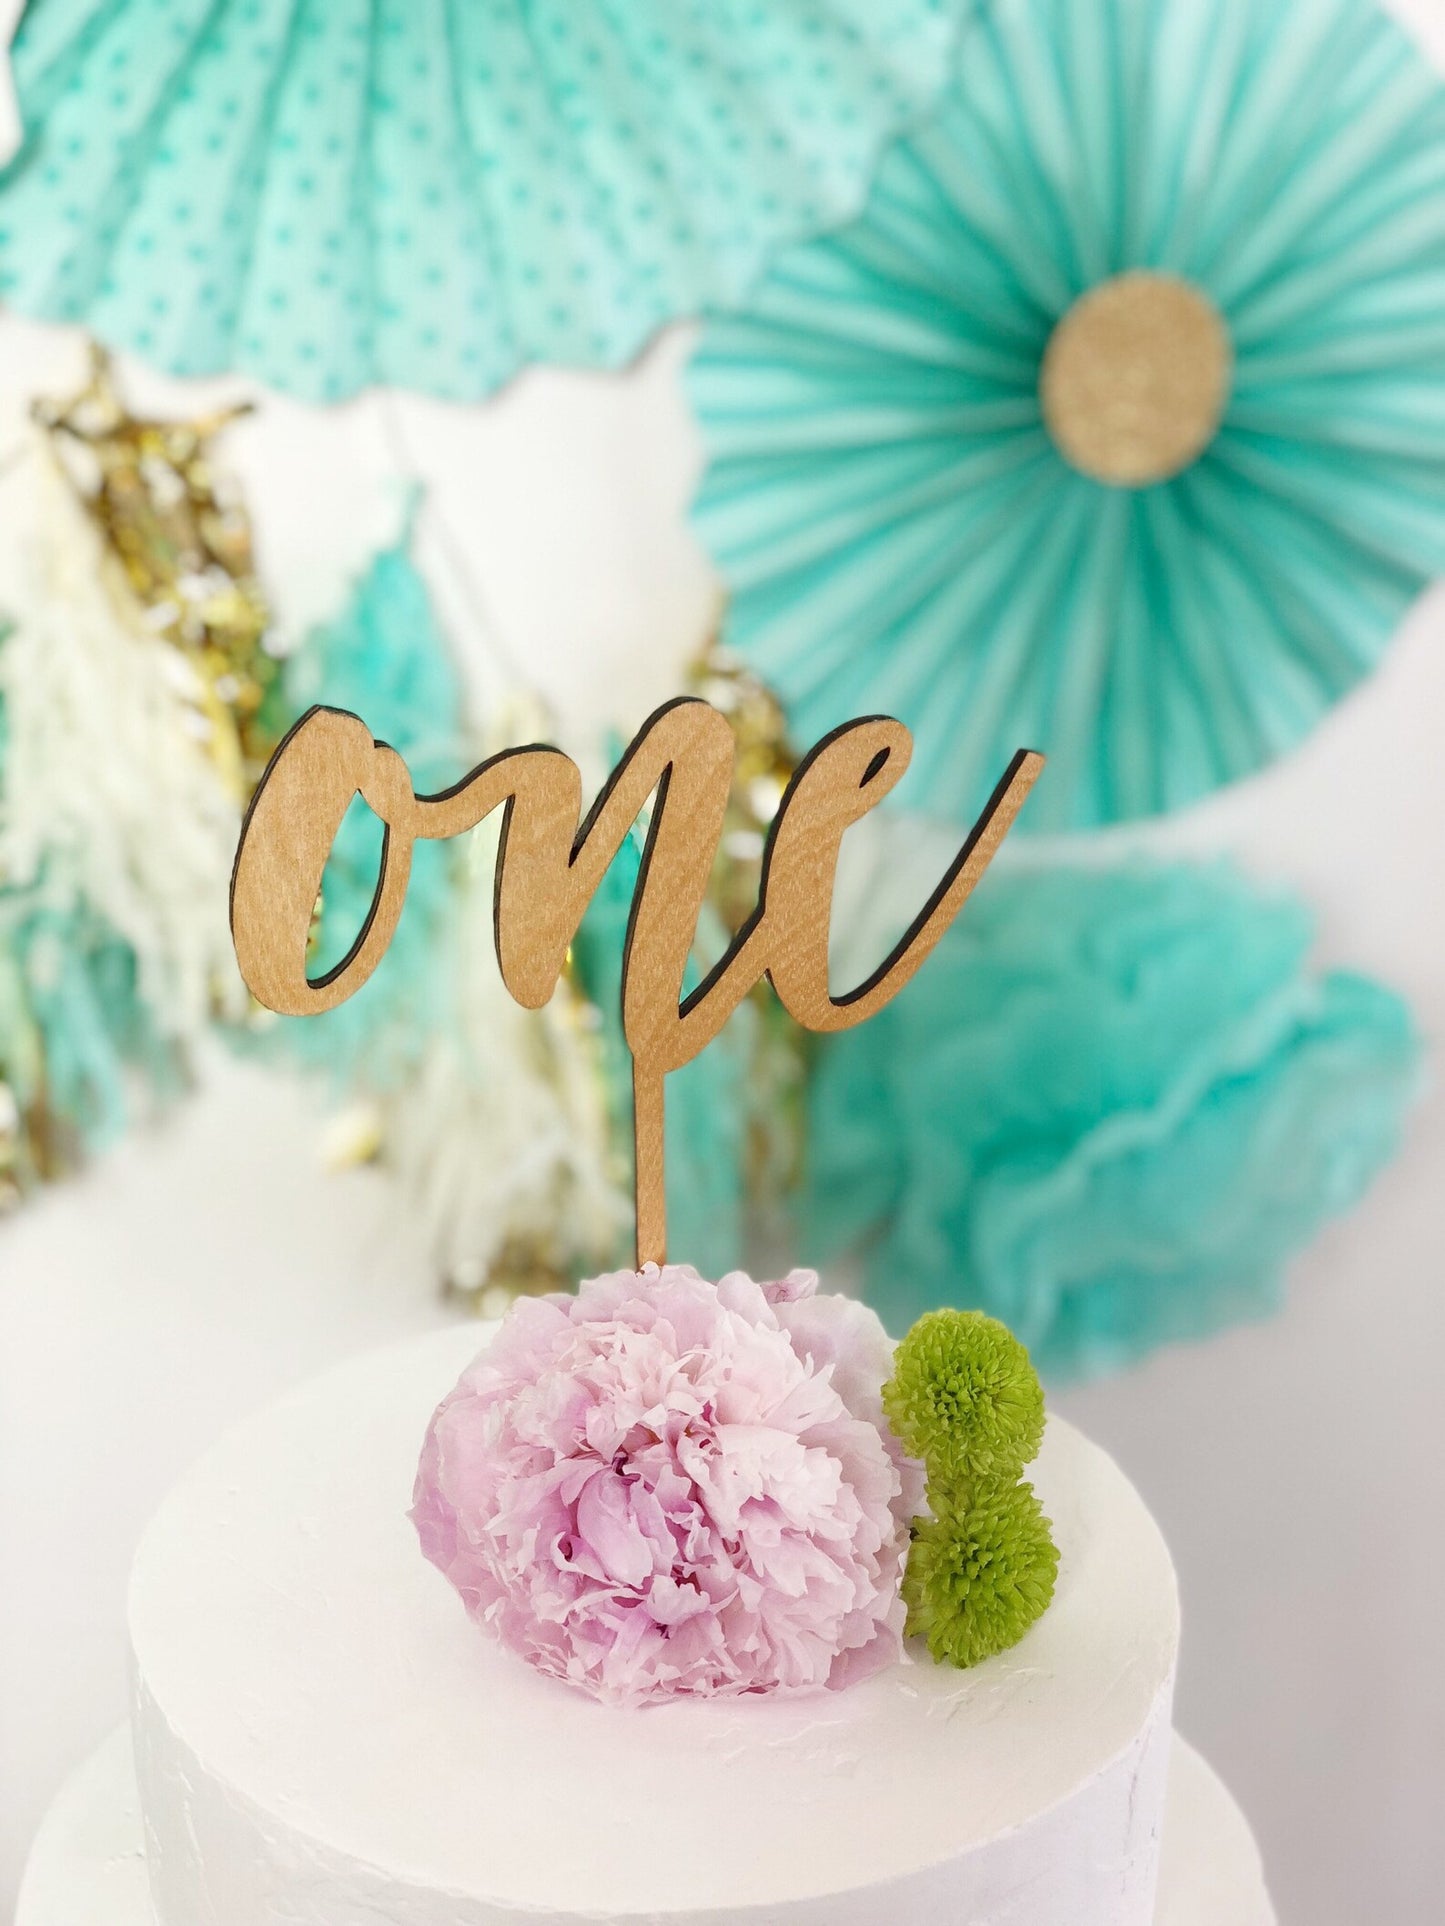 One Cake Topper - Great for Smash Cake!